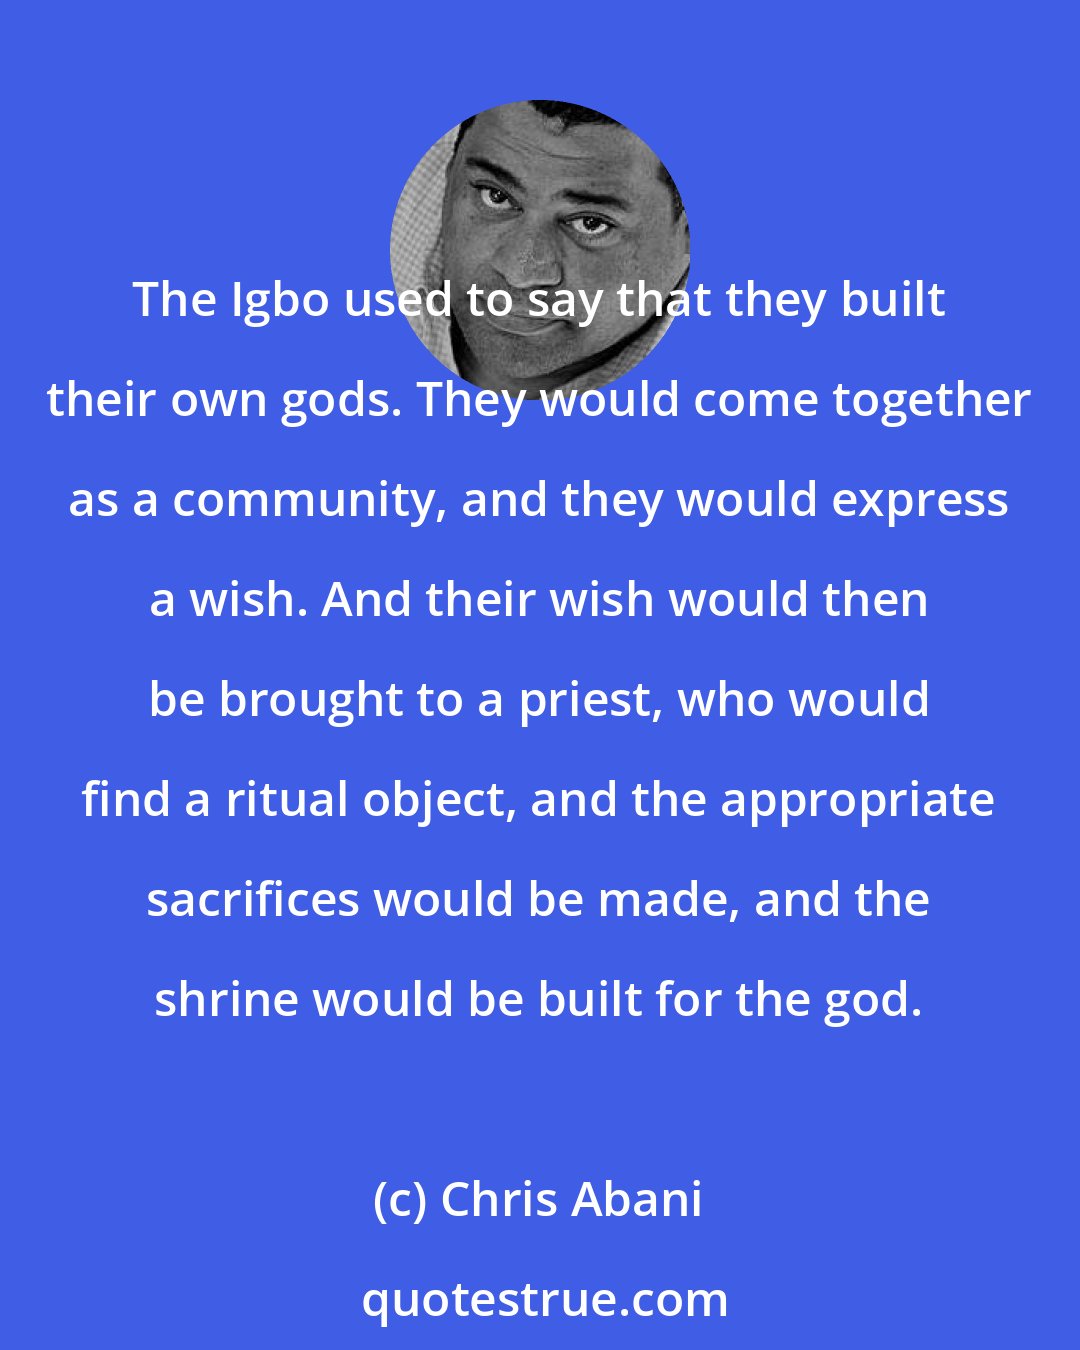 Chris Abani: The Igbo used to say that they built their own gods. They would come together as a community, and they would express a wish. And their wish would then be brought to a priest, who would find a ritual object, and the appropriate sacrifices would be made, and the shrine would be built for the god.